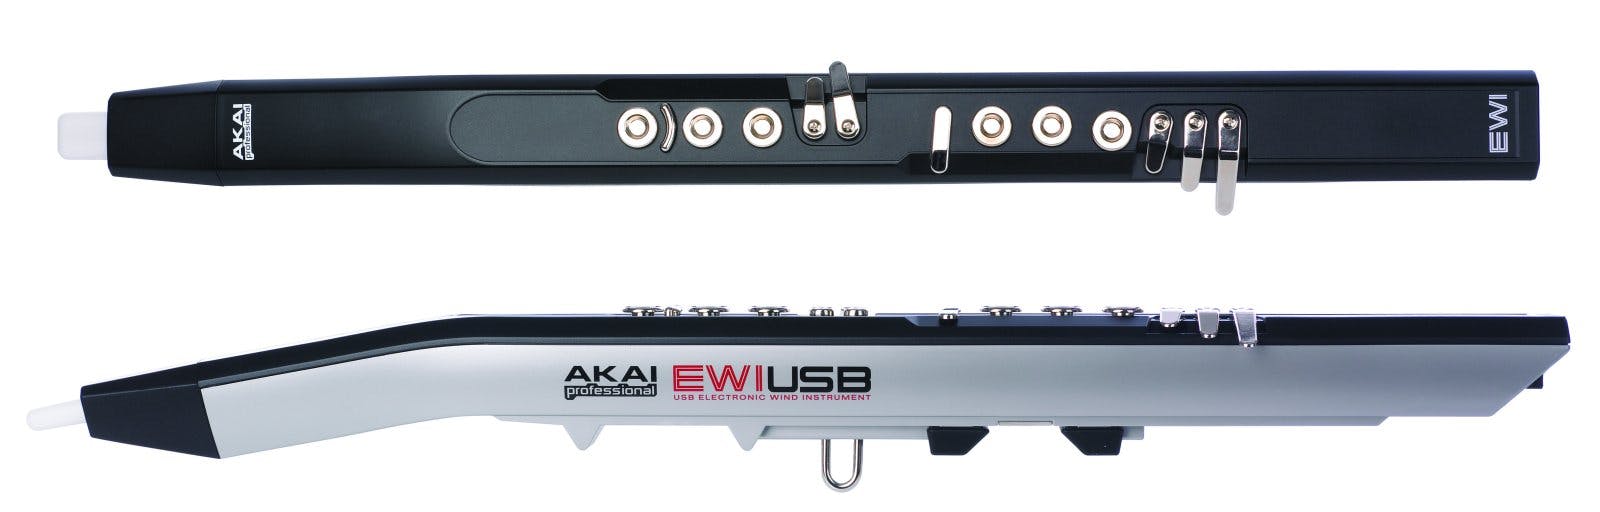 best stands to use for akai ewi usb